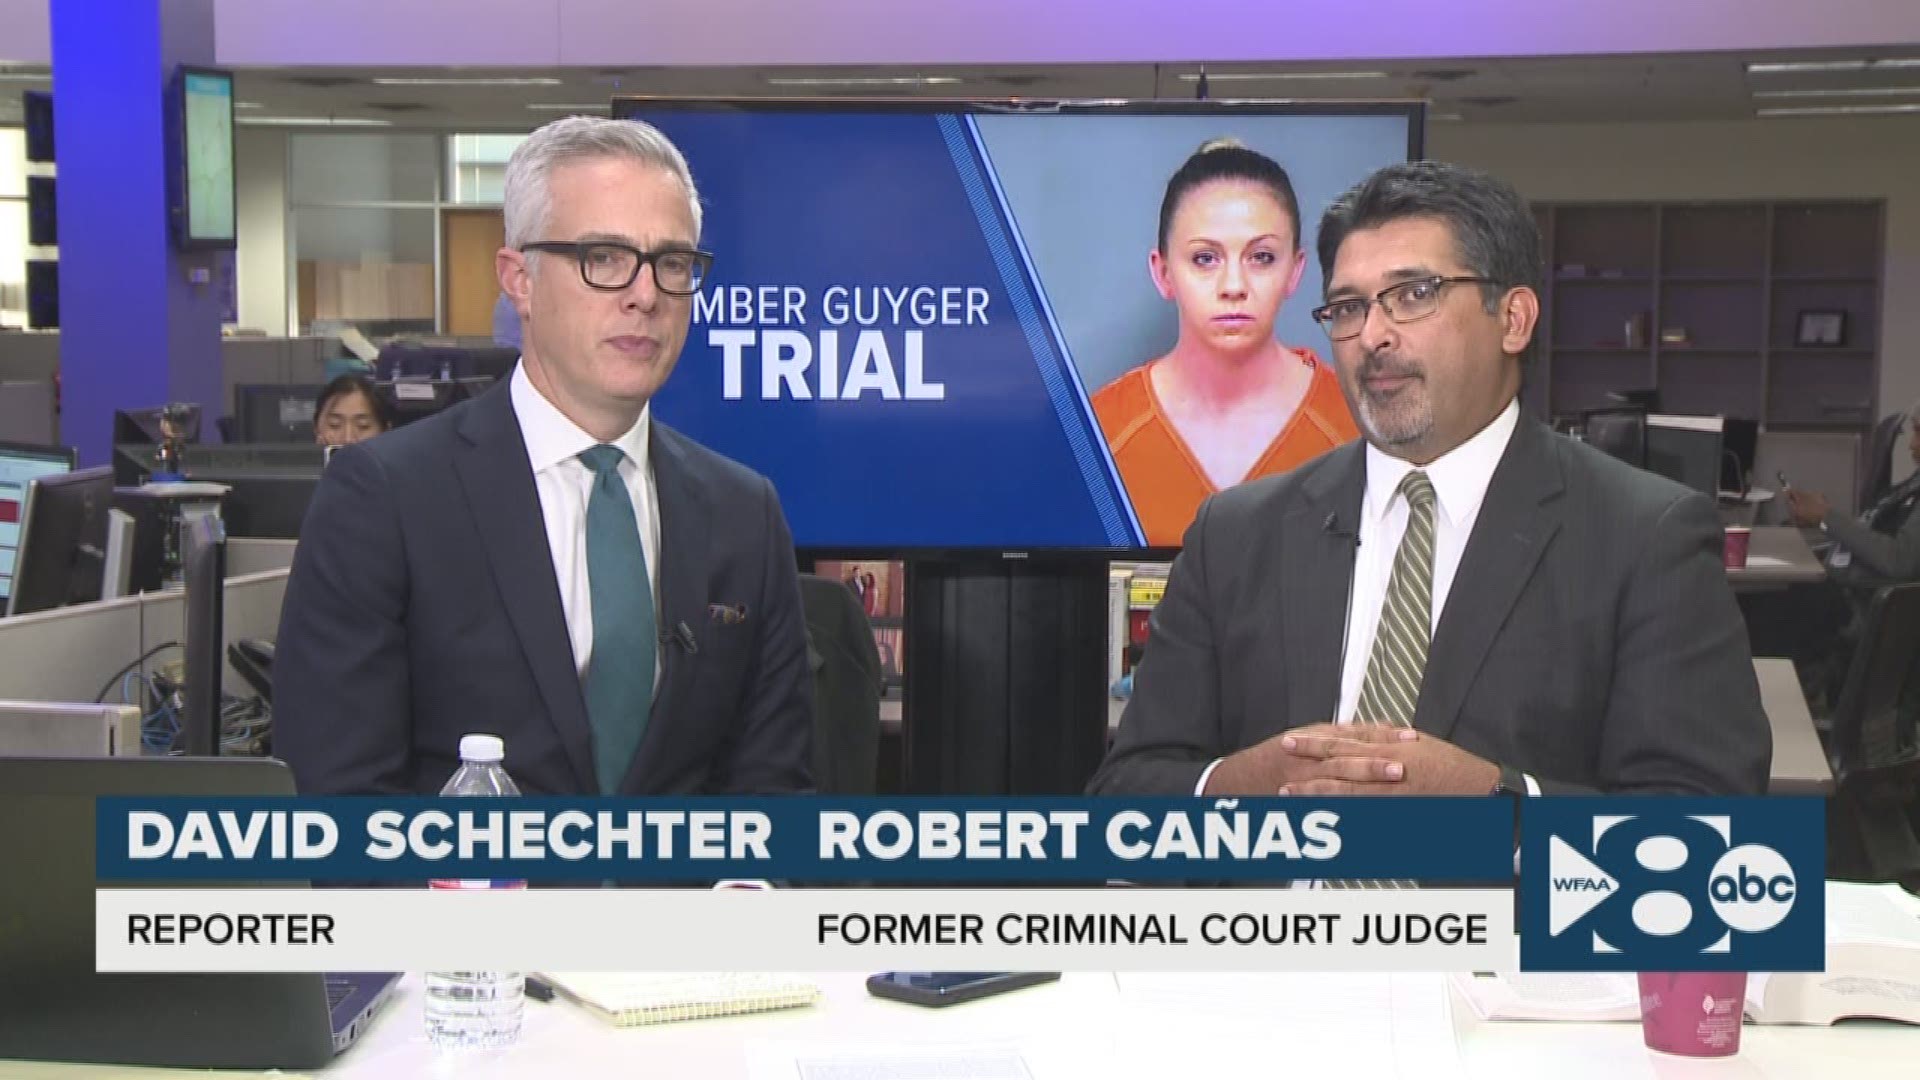 Takeaways from WFAA's newsroom in Dallas on Day 5 of the Amber Guyger trial.